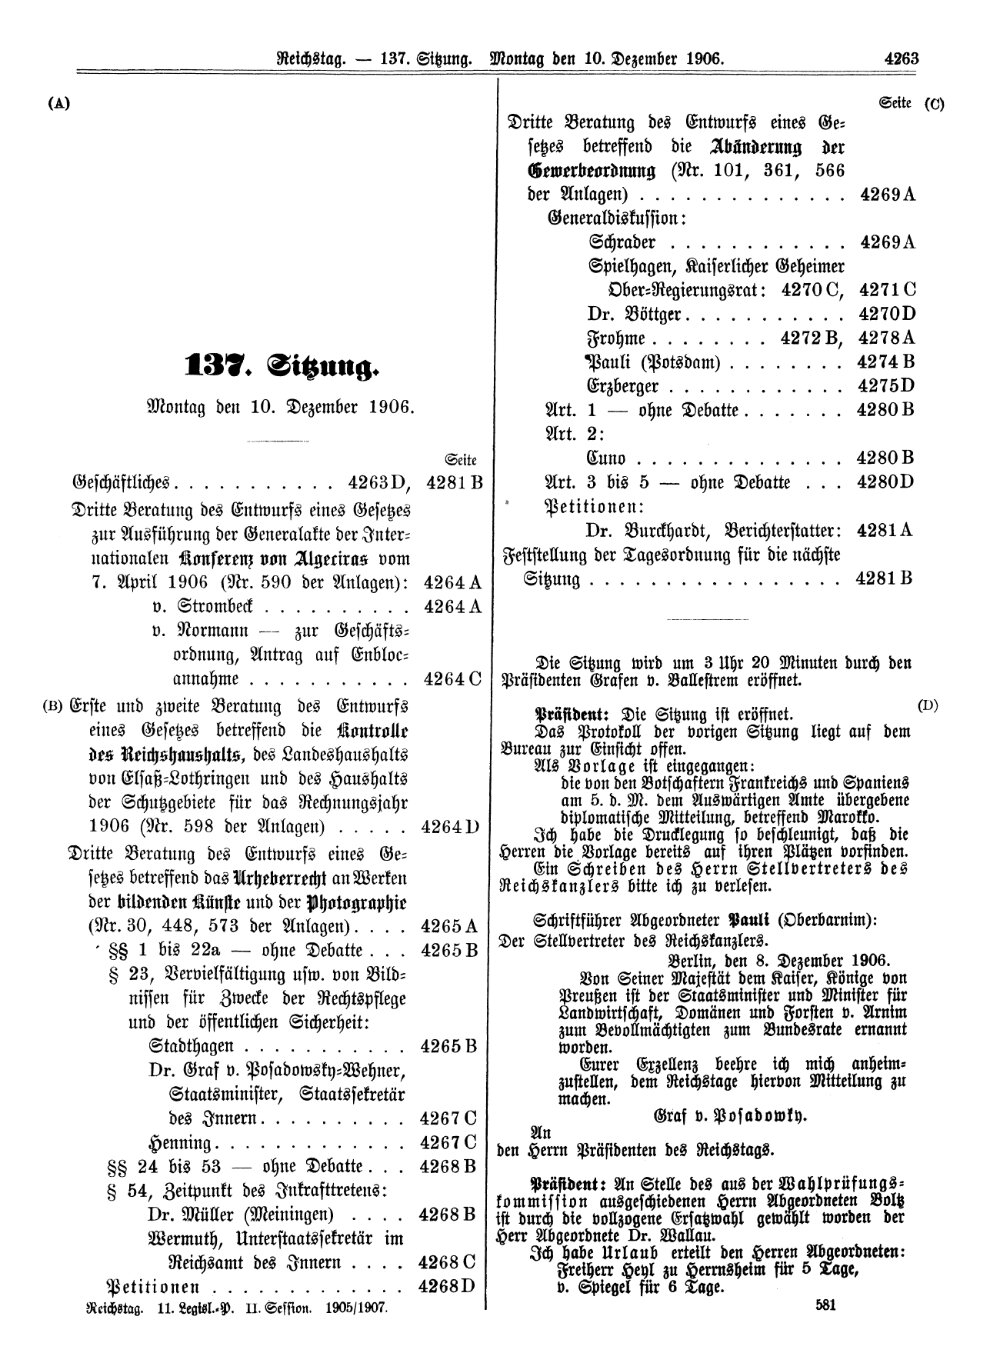 Scan of page 4263